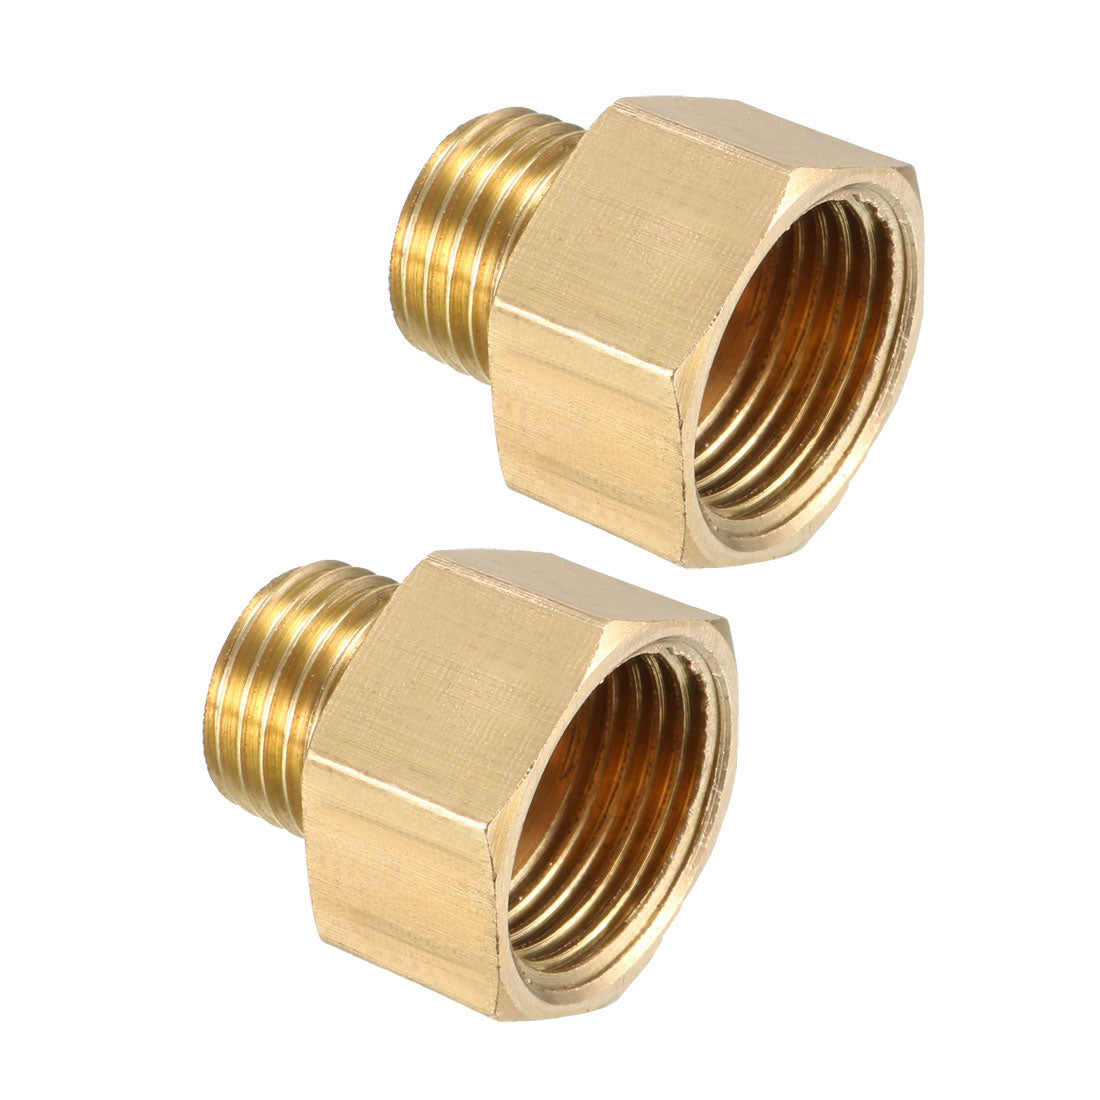 uxcell Uxcell Brass Threaded Pipe Fitting G1/4 Male x G3/8 Female Coupling 2pcs